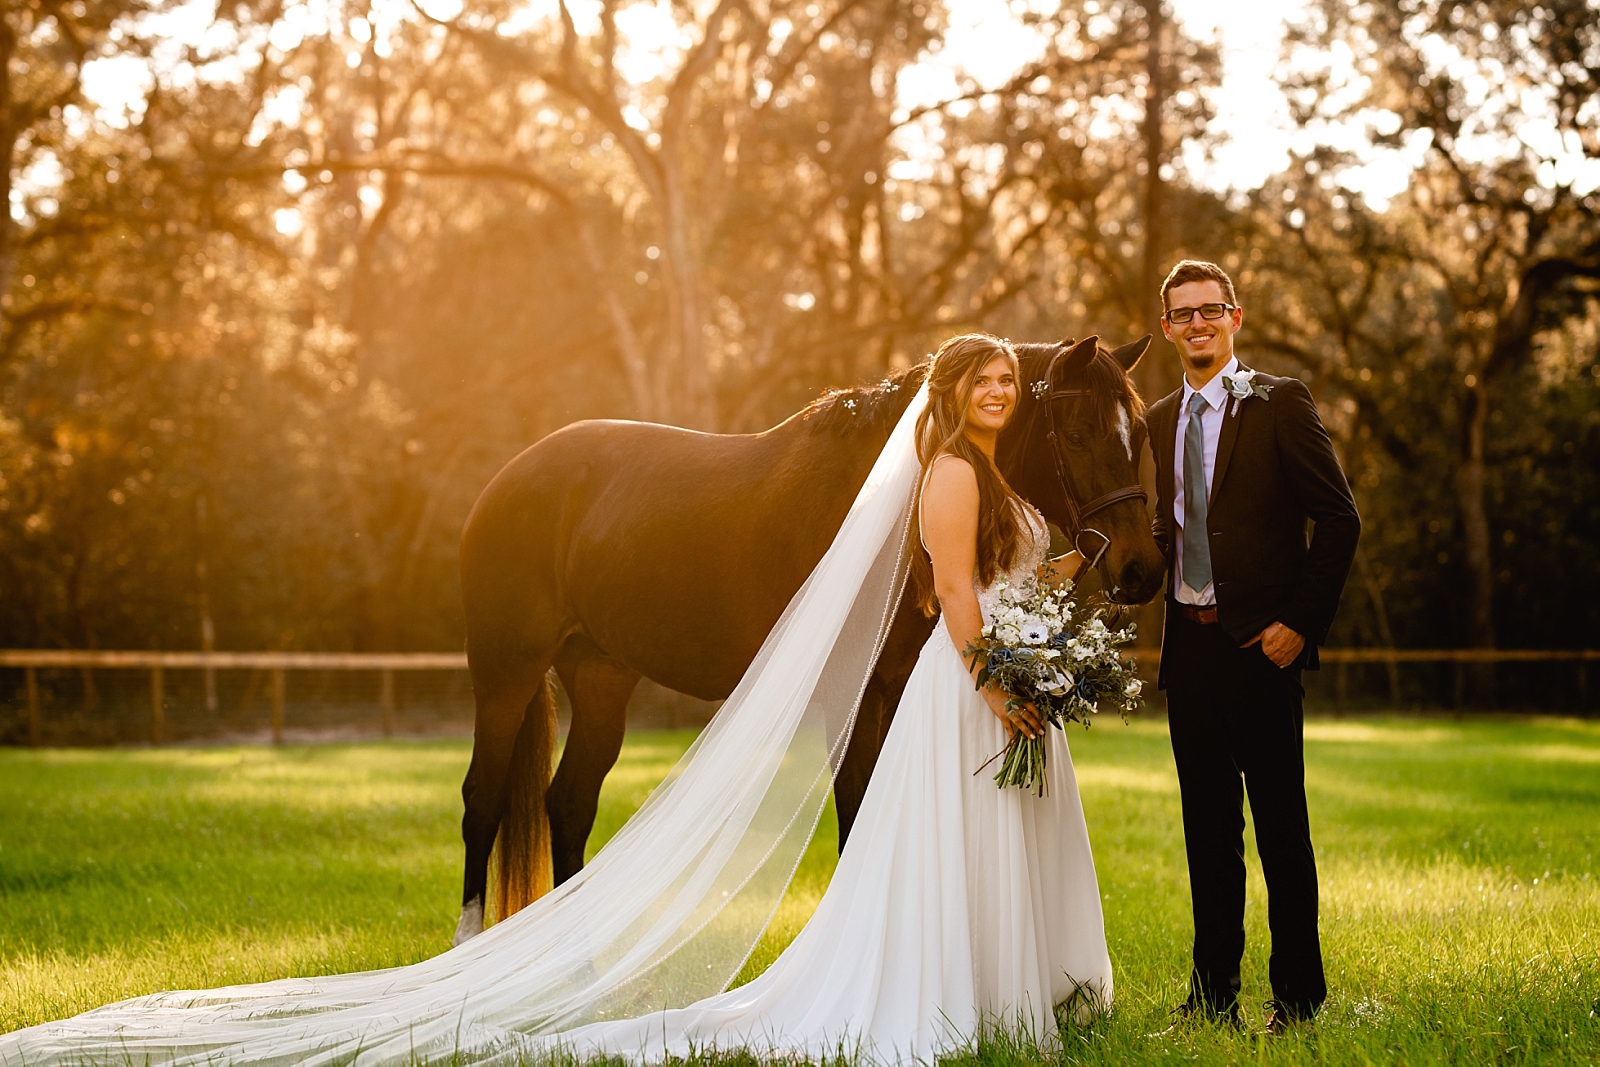 Equestrian bride takes pictures with her horse at her wedding. She put baby's breath in the horses mane. Posing ideas for bride and horse.